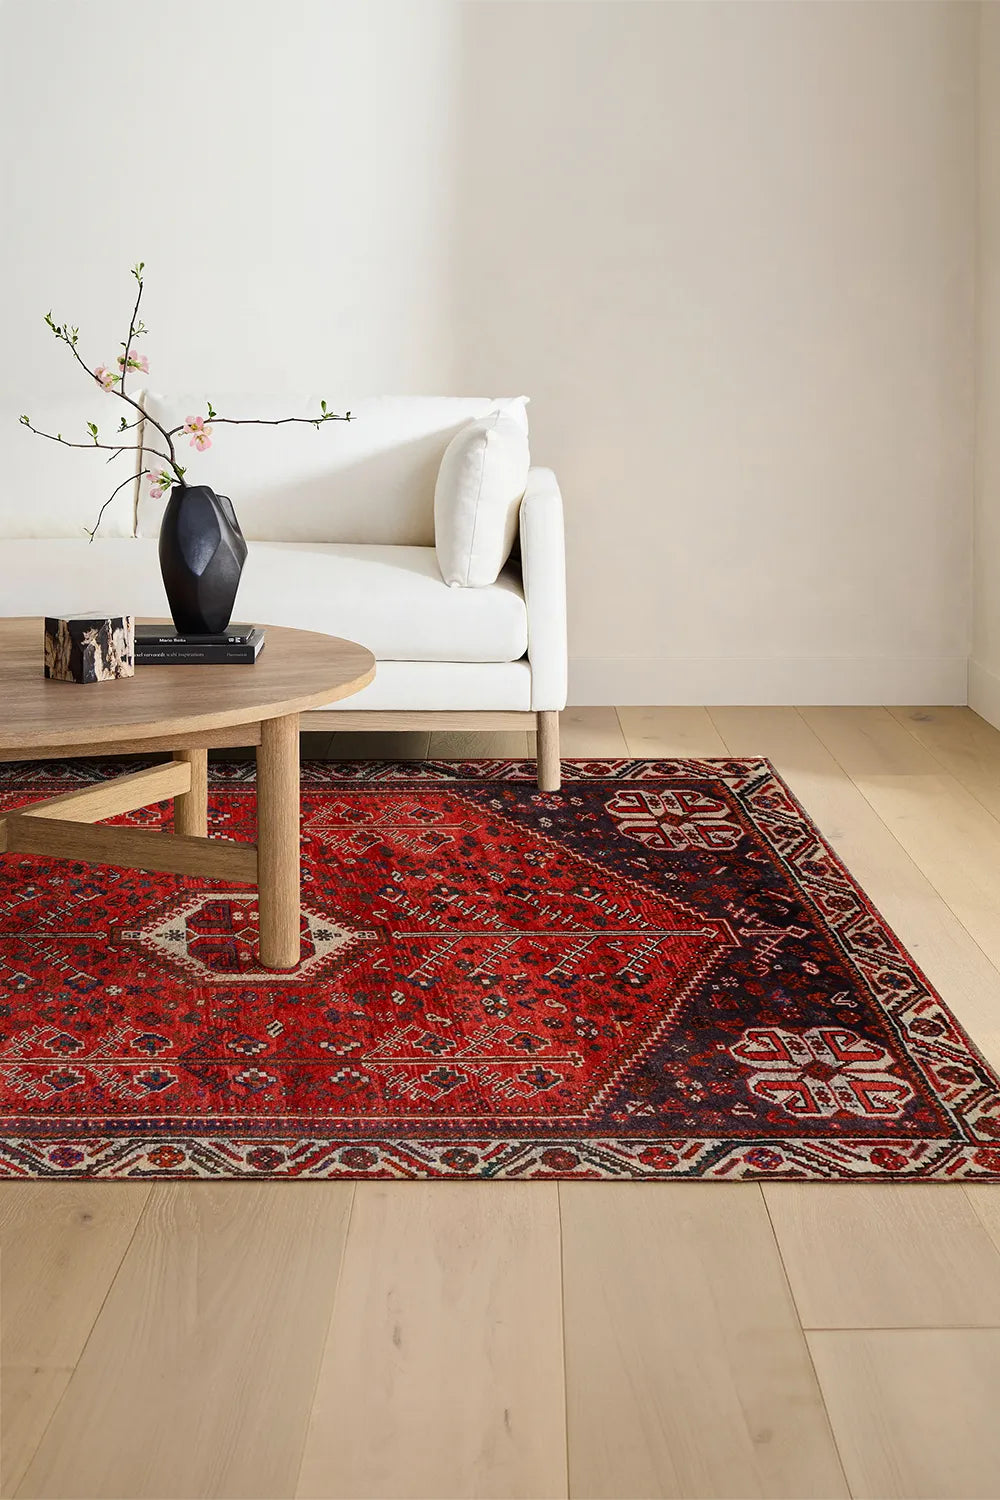 Shiraz Hand Knotted Wool Rug  293x204cm